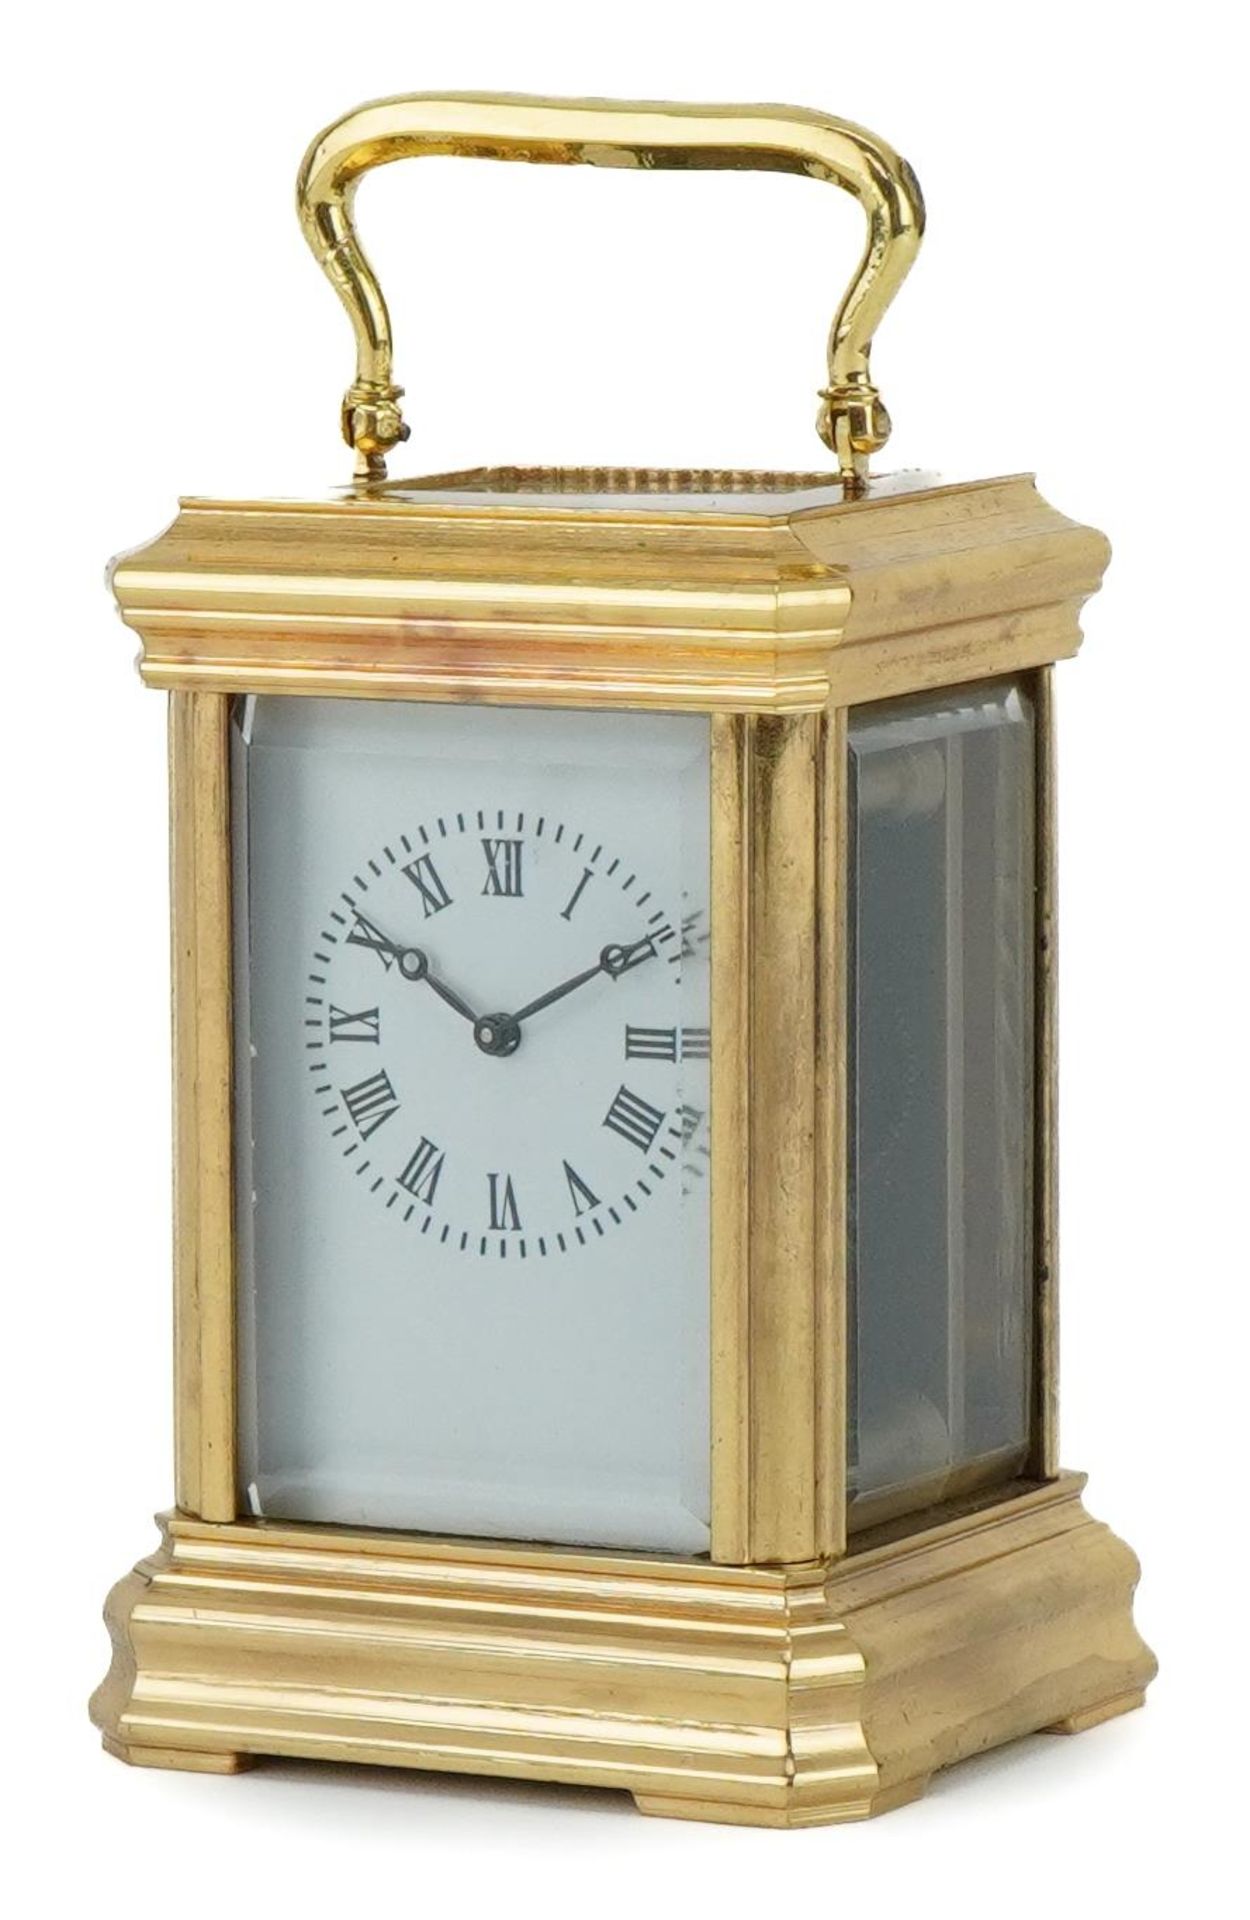 Miniature brass carriage clock with enamelled dial having Roman numerals, 9.5cm high : For further